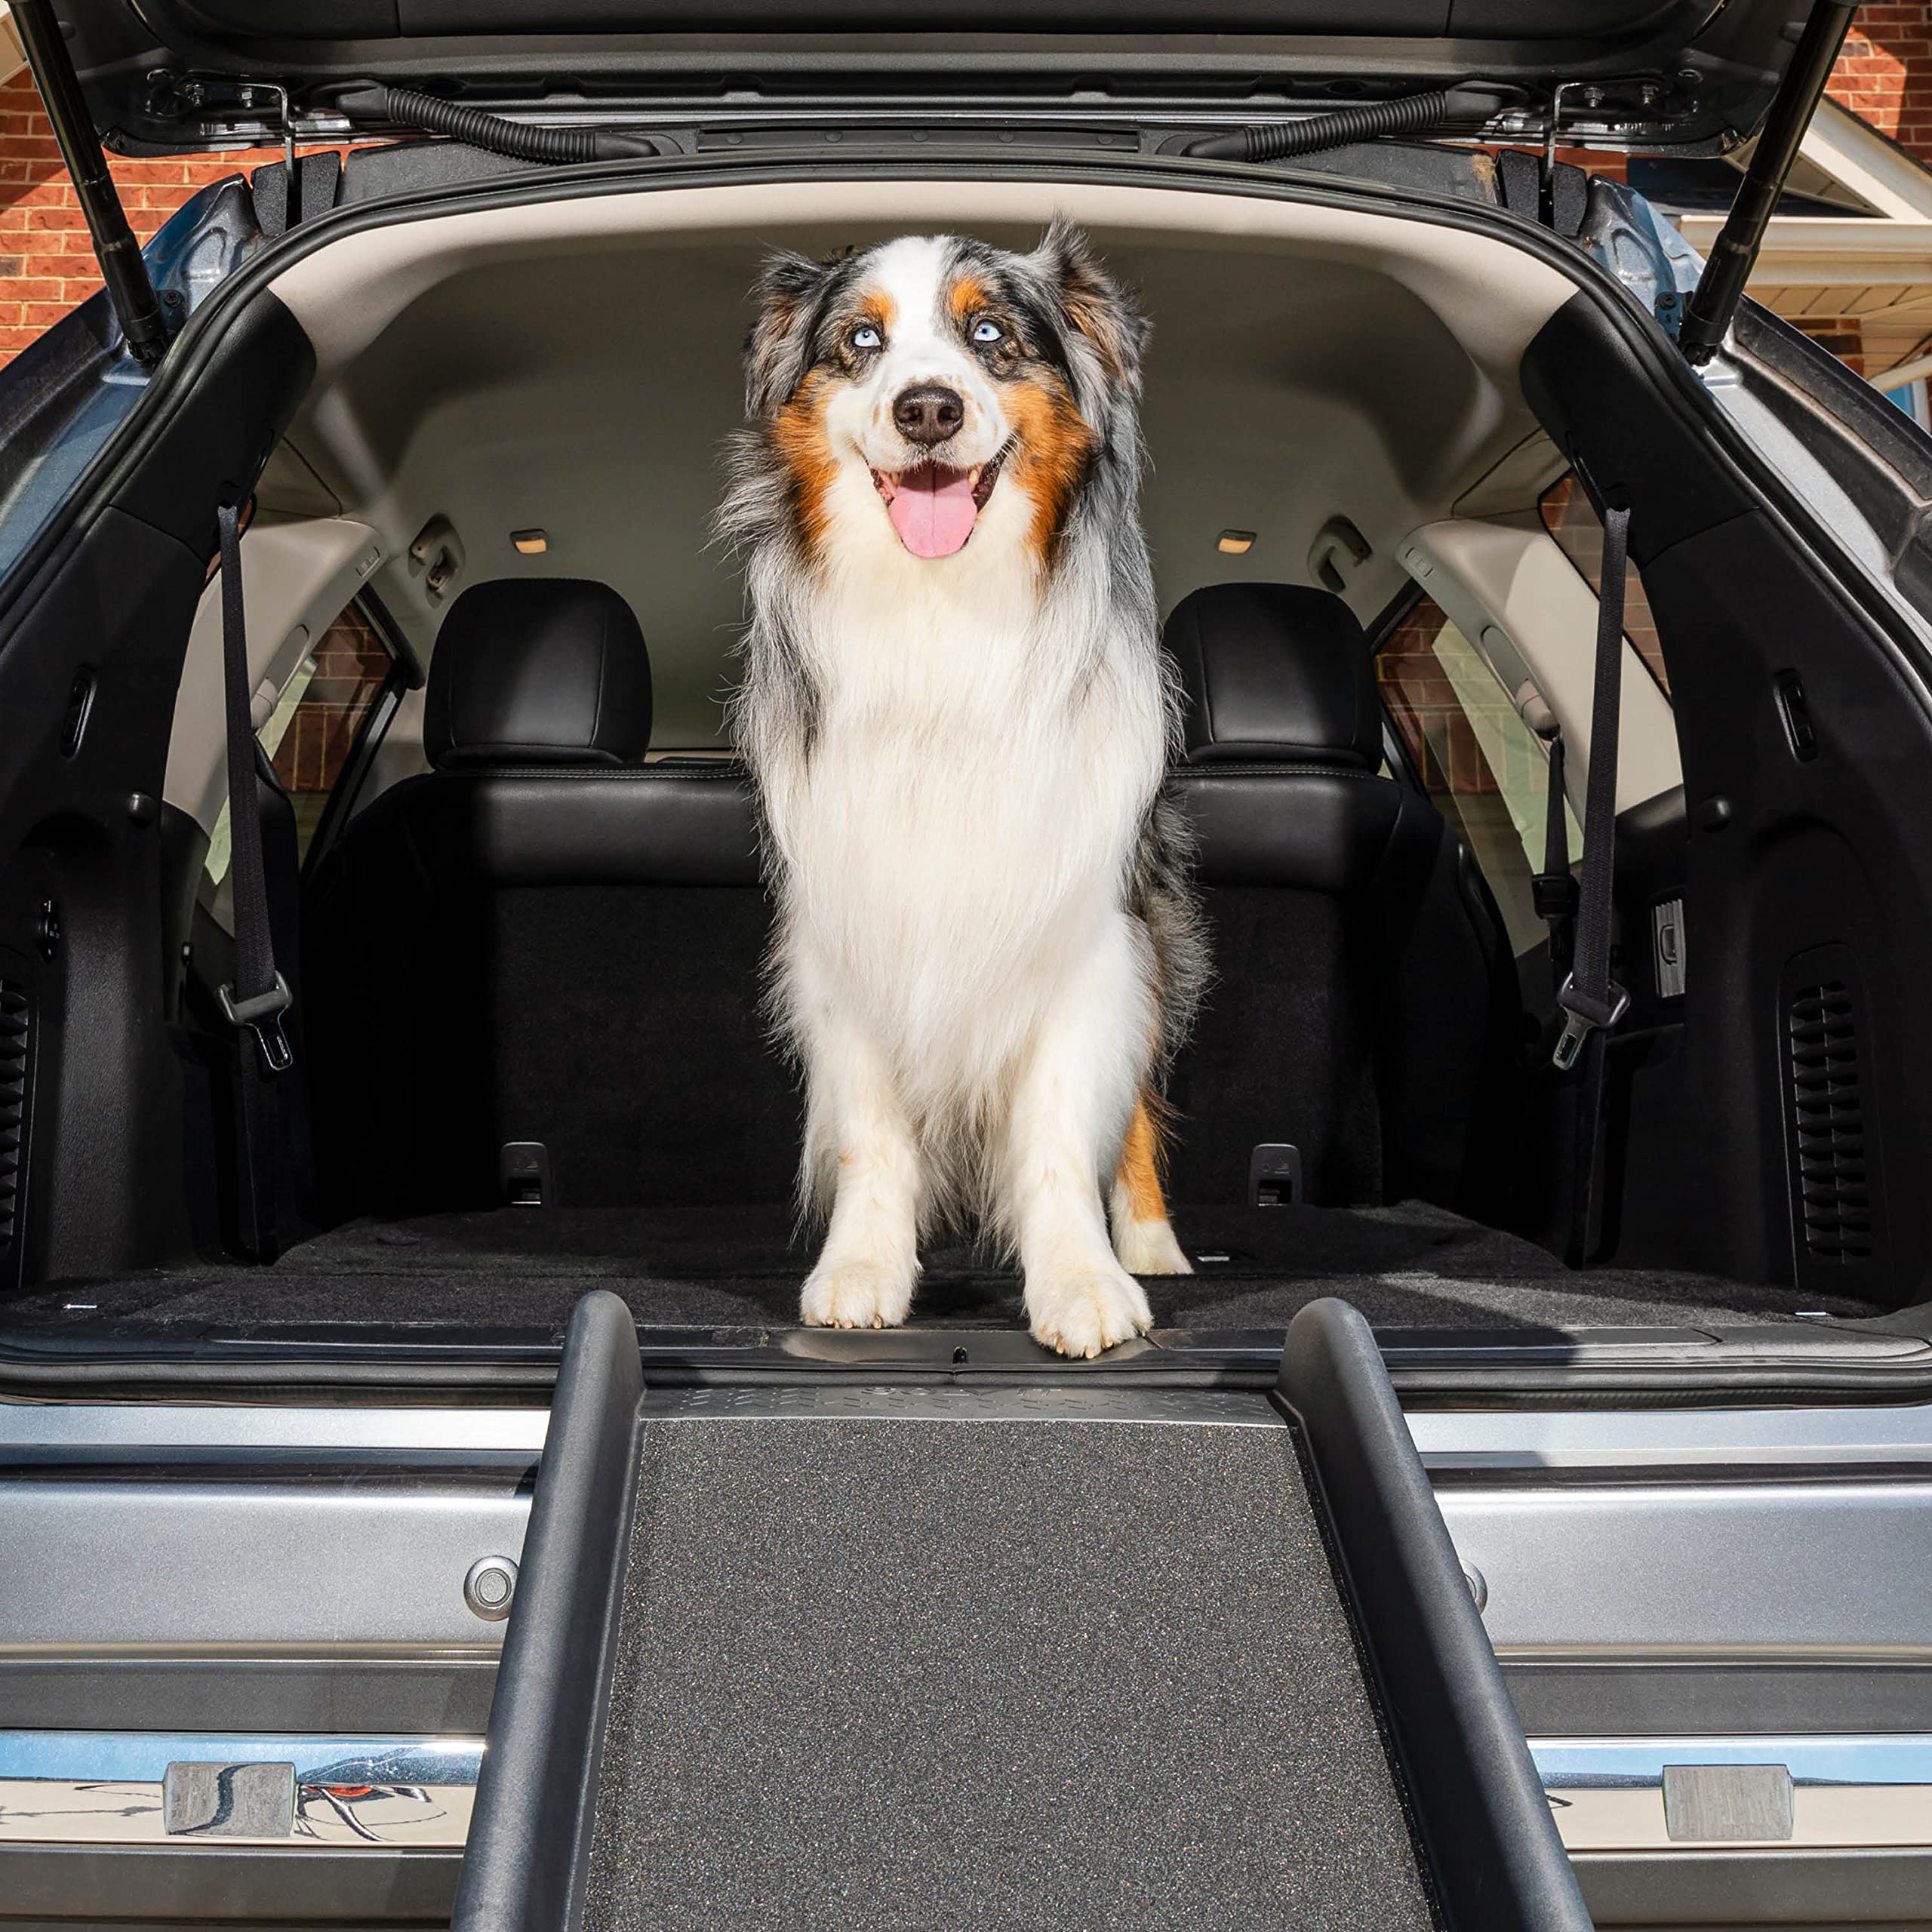 PetSafe Happy Ride Folding Dog Ramp for Cars, Trucks, & SUVs - 62 Inch Portable Pet Ramp for Large Dogs with Siderails, Non-Slip - Weighs Only 10 lb, Supports up to 150 lb, Easy Storage, Folds in Half